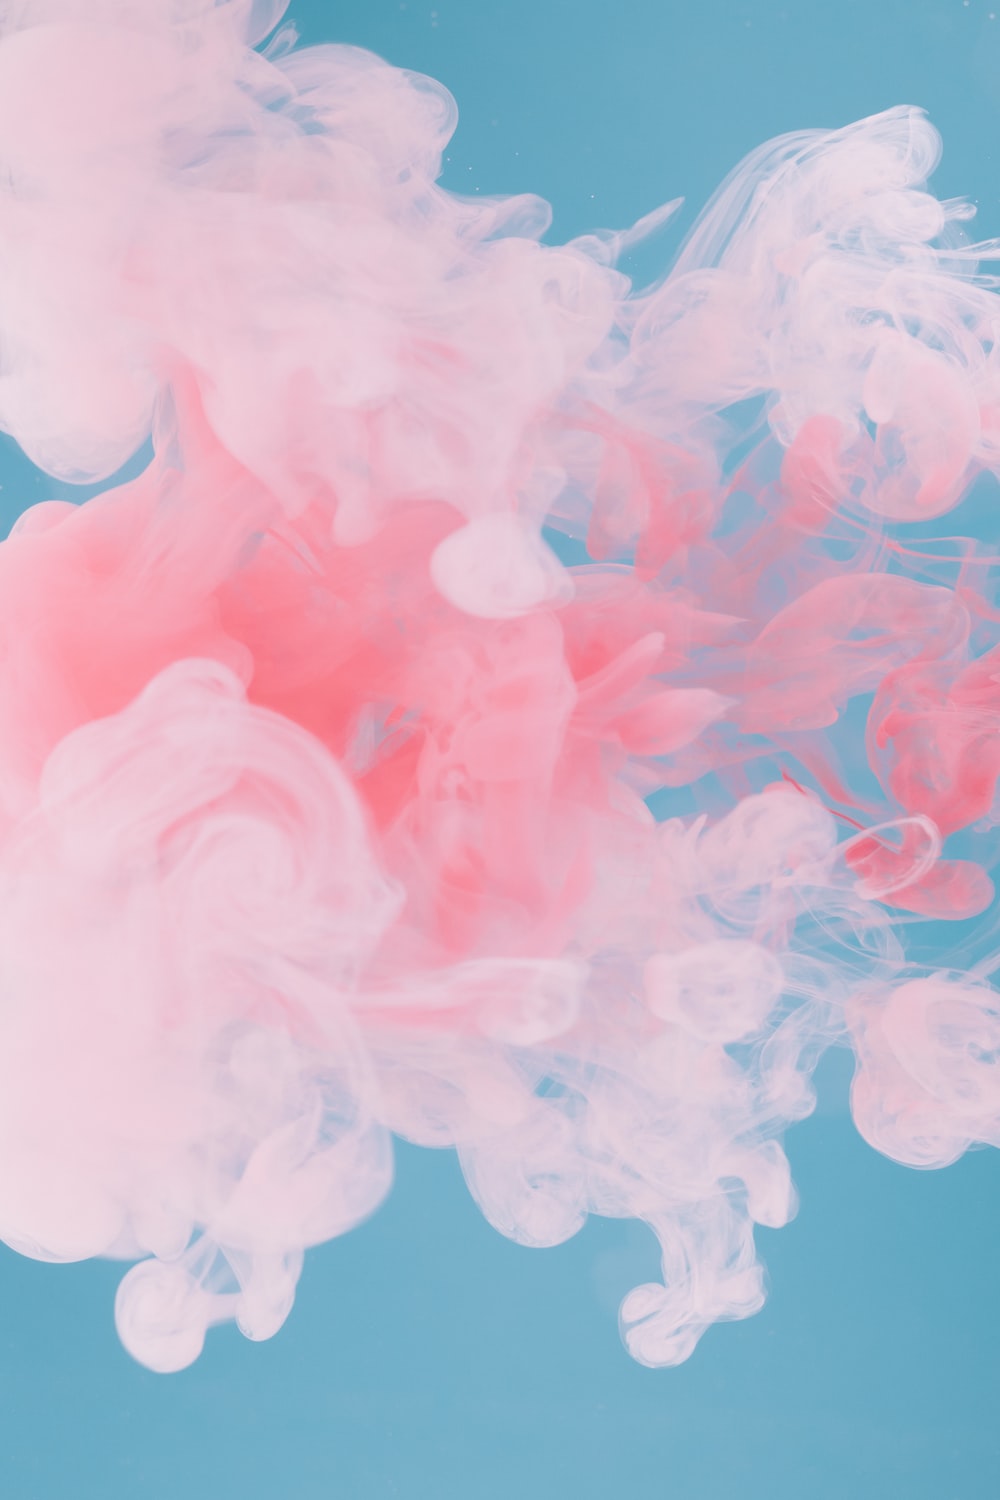 red and blue smoke illustration photo